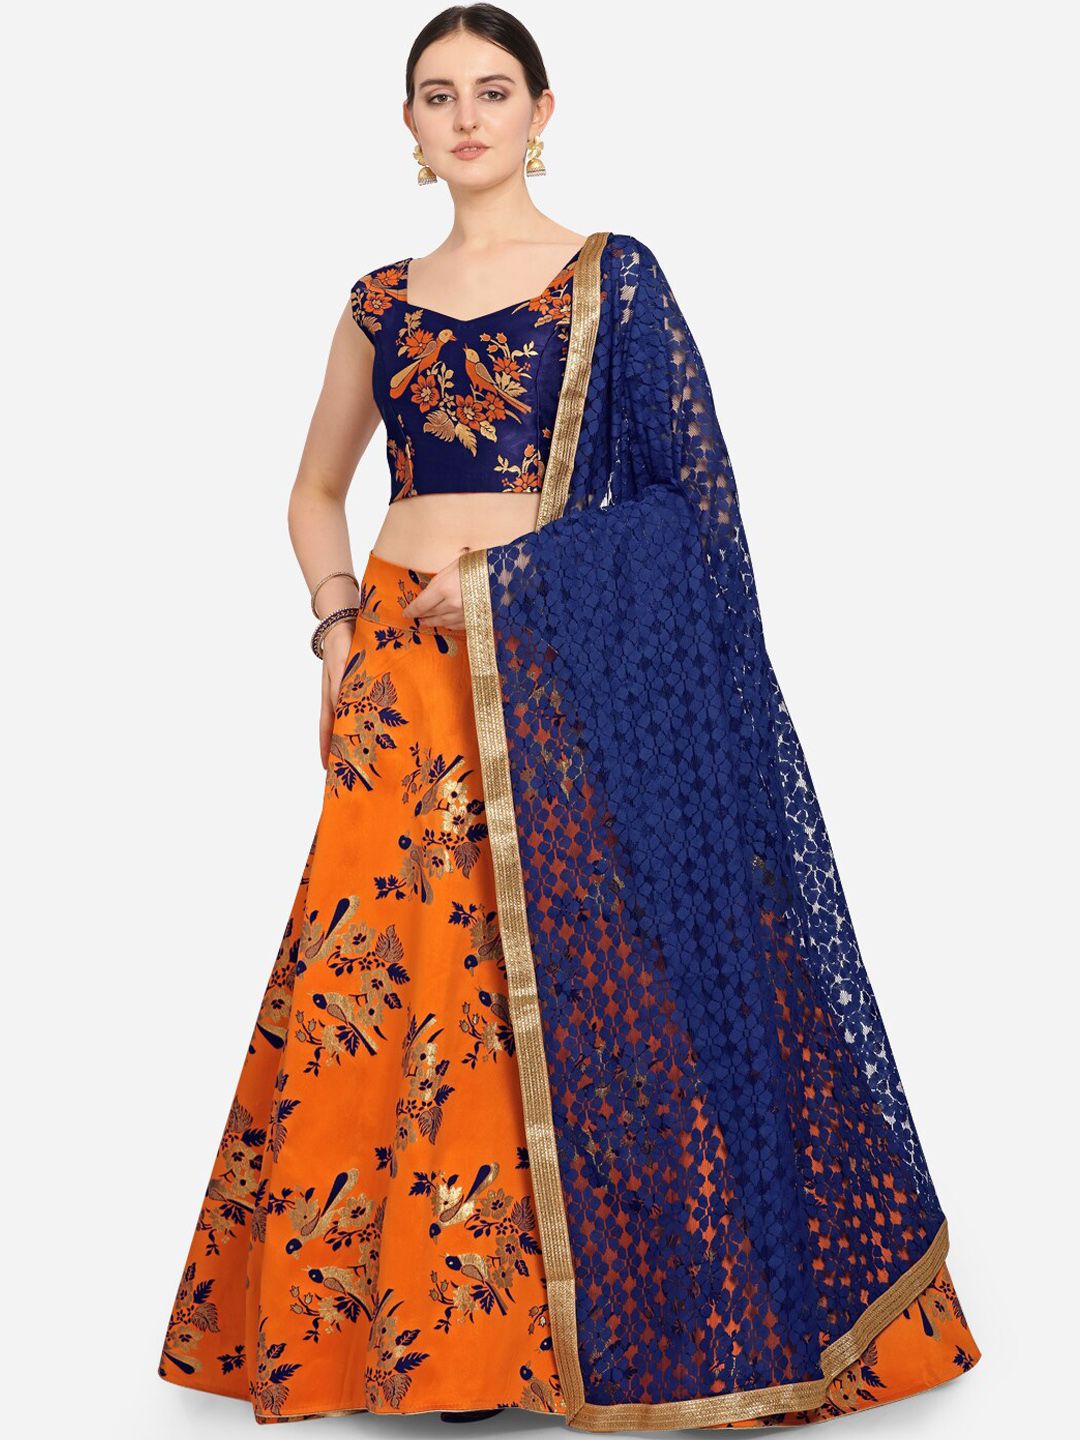 VRSALES Orange & Navy Blue Woven Design Semi-Stitched Lehenga & Unstitched Blouse with Dupatta Price in India